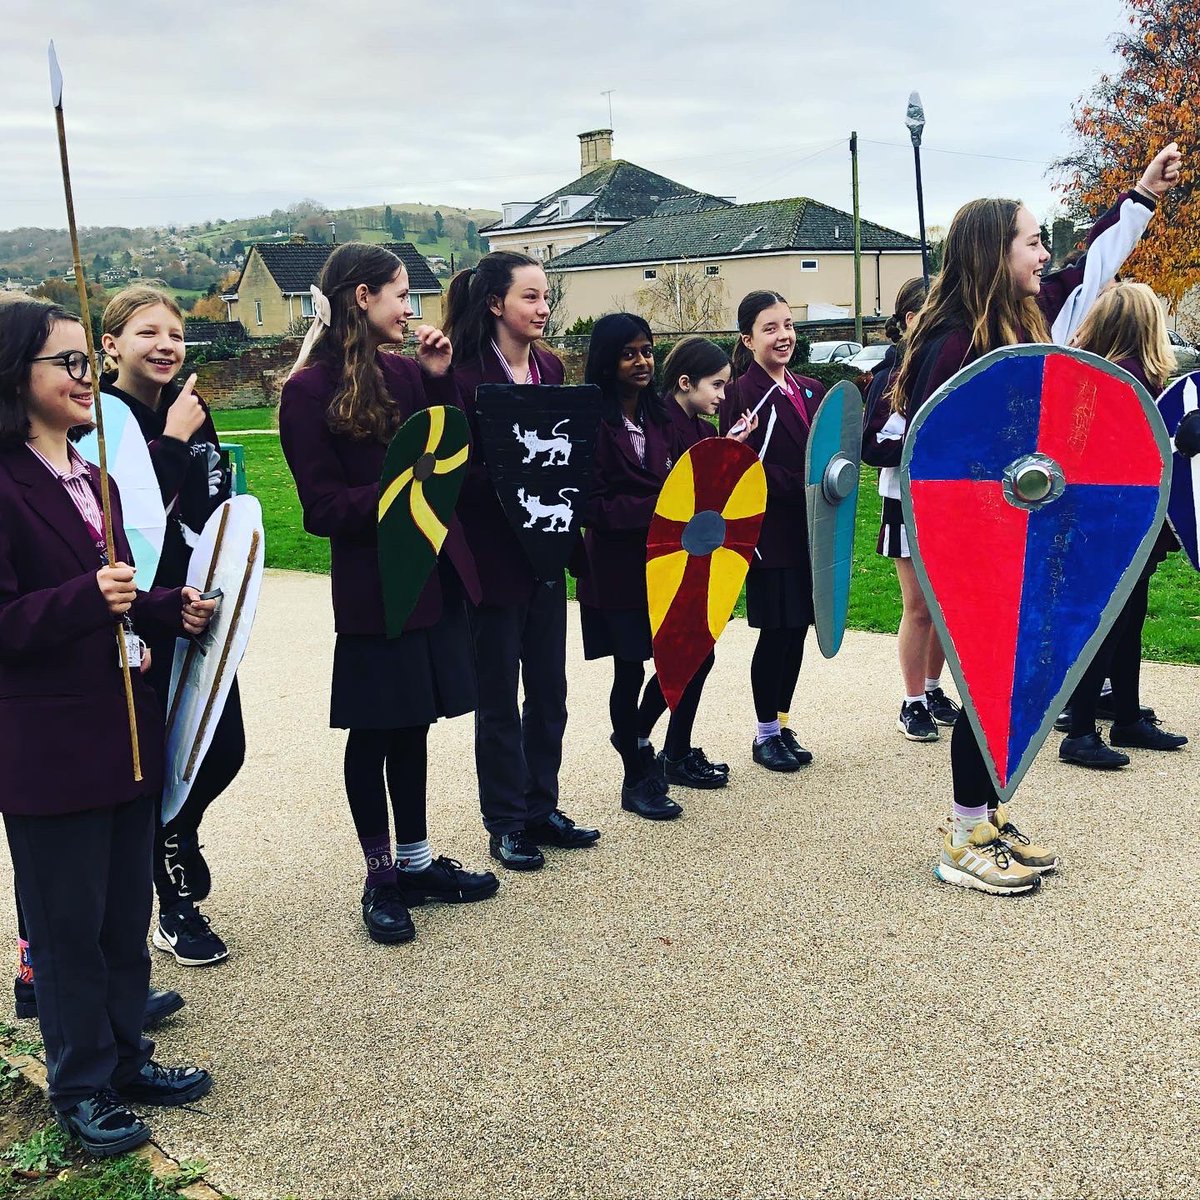 Y7 students have been re-enacting the #battleof1066 today in their History lesson! Love the homemade shields and weapons!🛡 

#spiritoffun #ks3history #everythingispossible